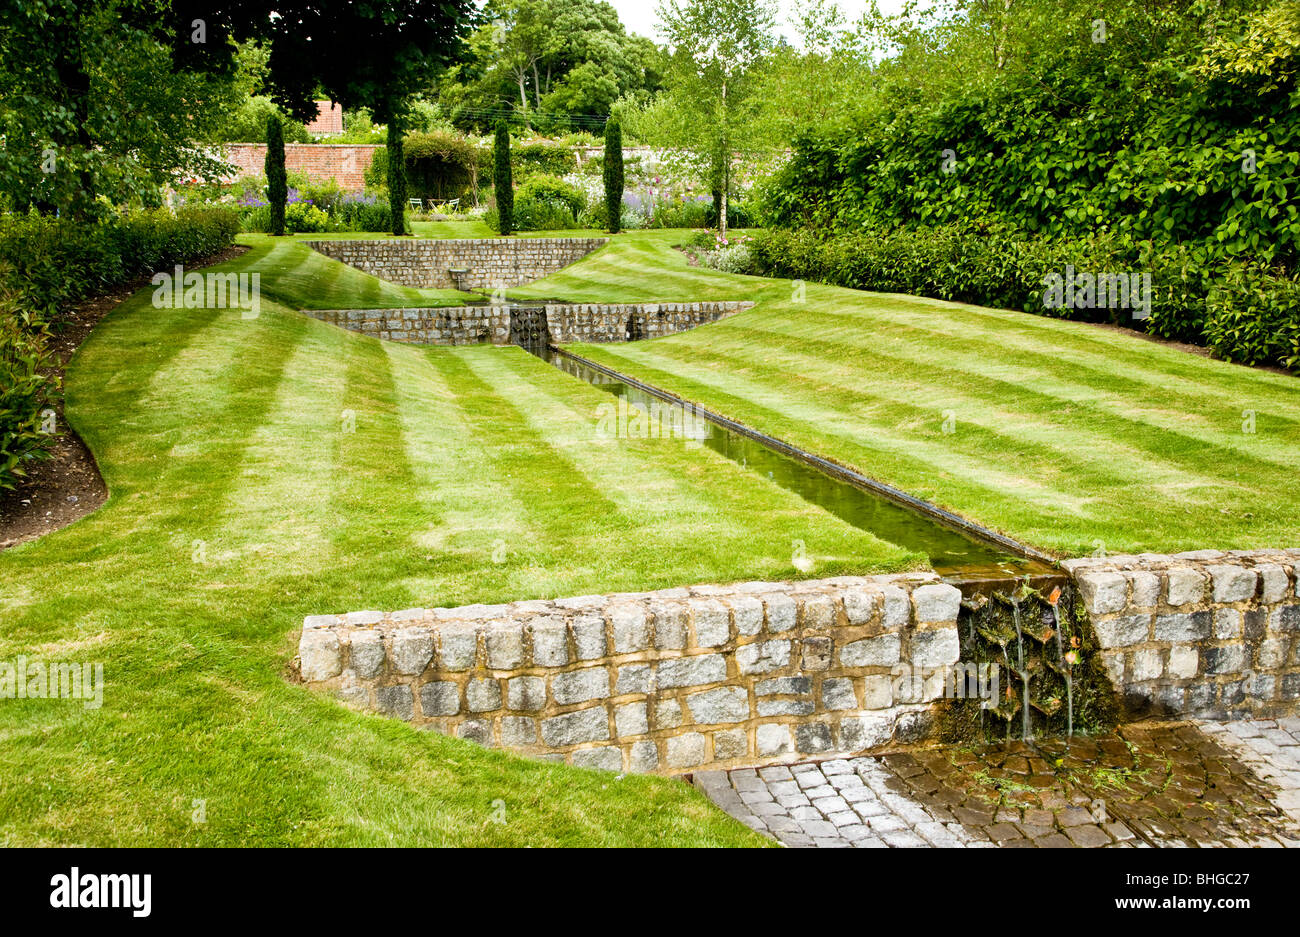 A water feature or rill in an English country garden on a summer's day. Stock Photo